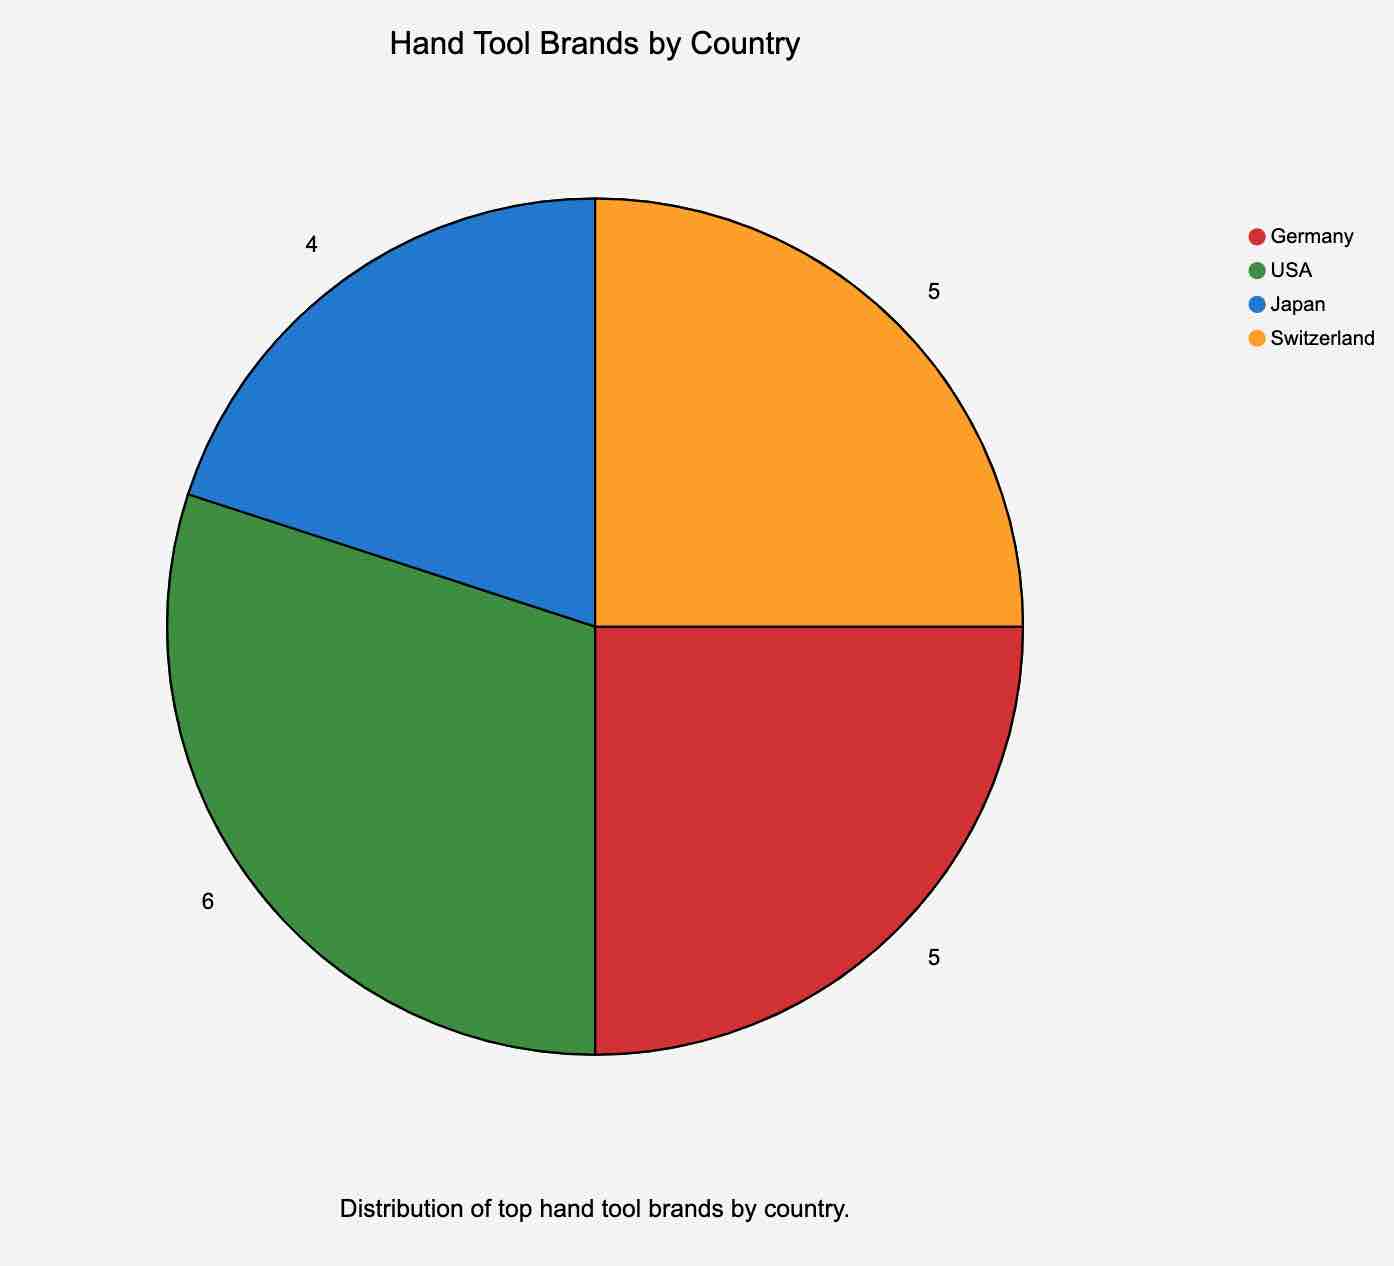 Here's the chart showing the distribution of top hand tool brands by country